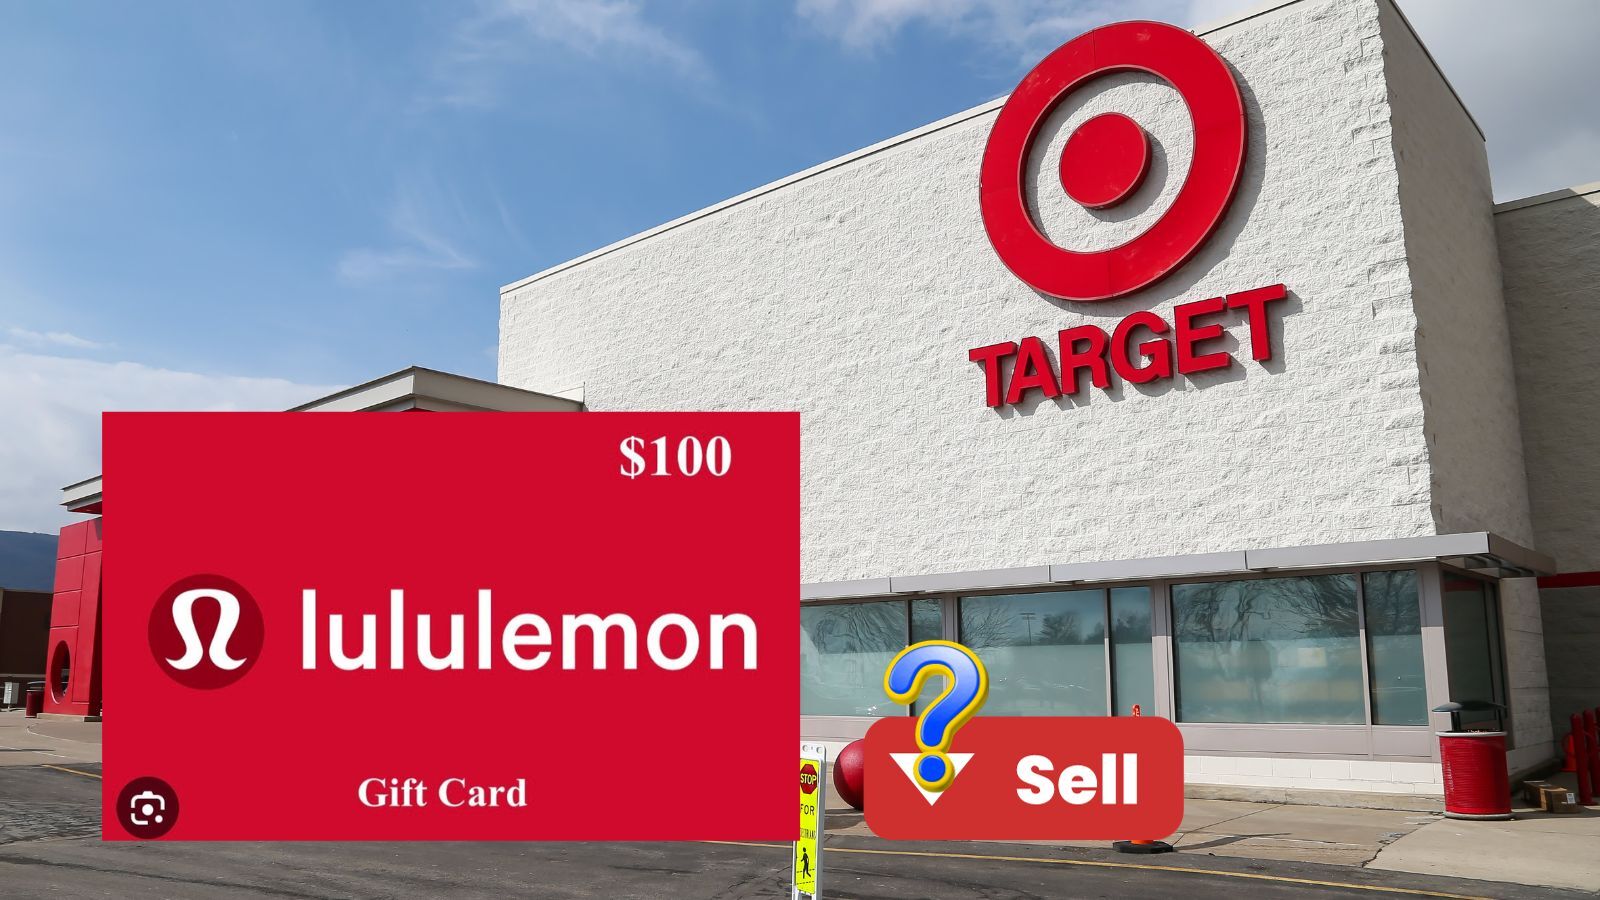 Does Target Sell Lululemon Gift Cards? [Answered]